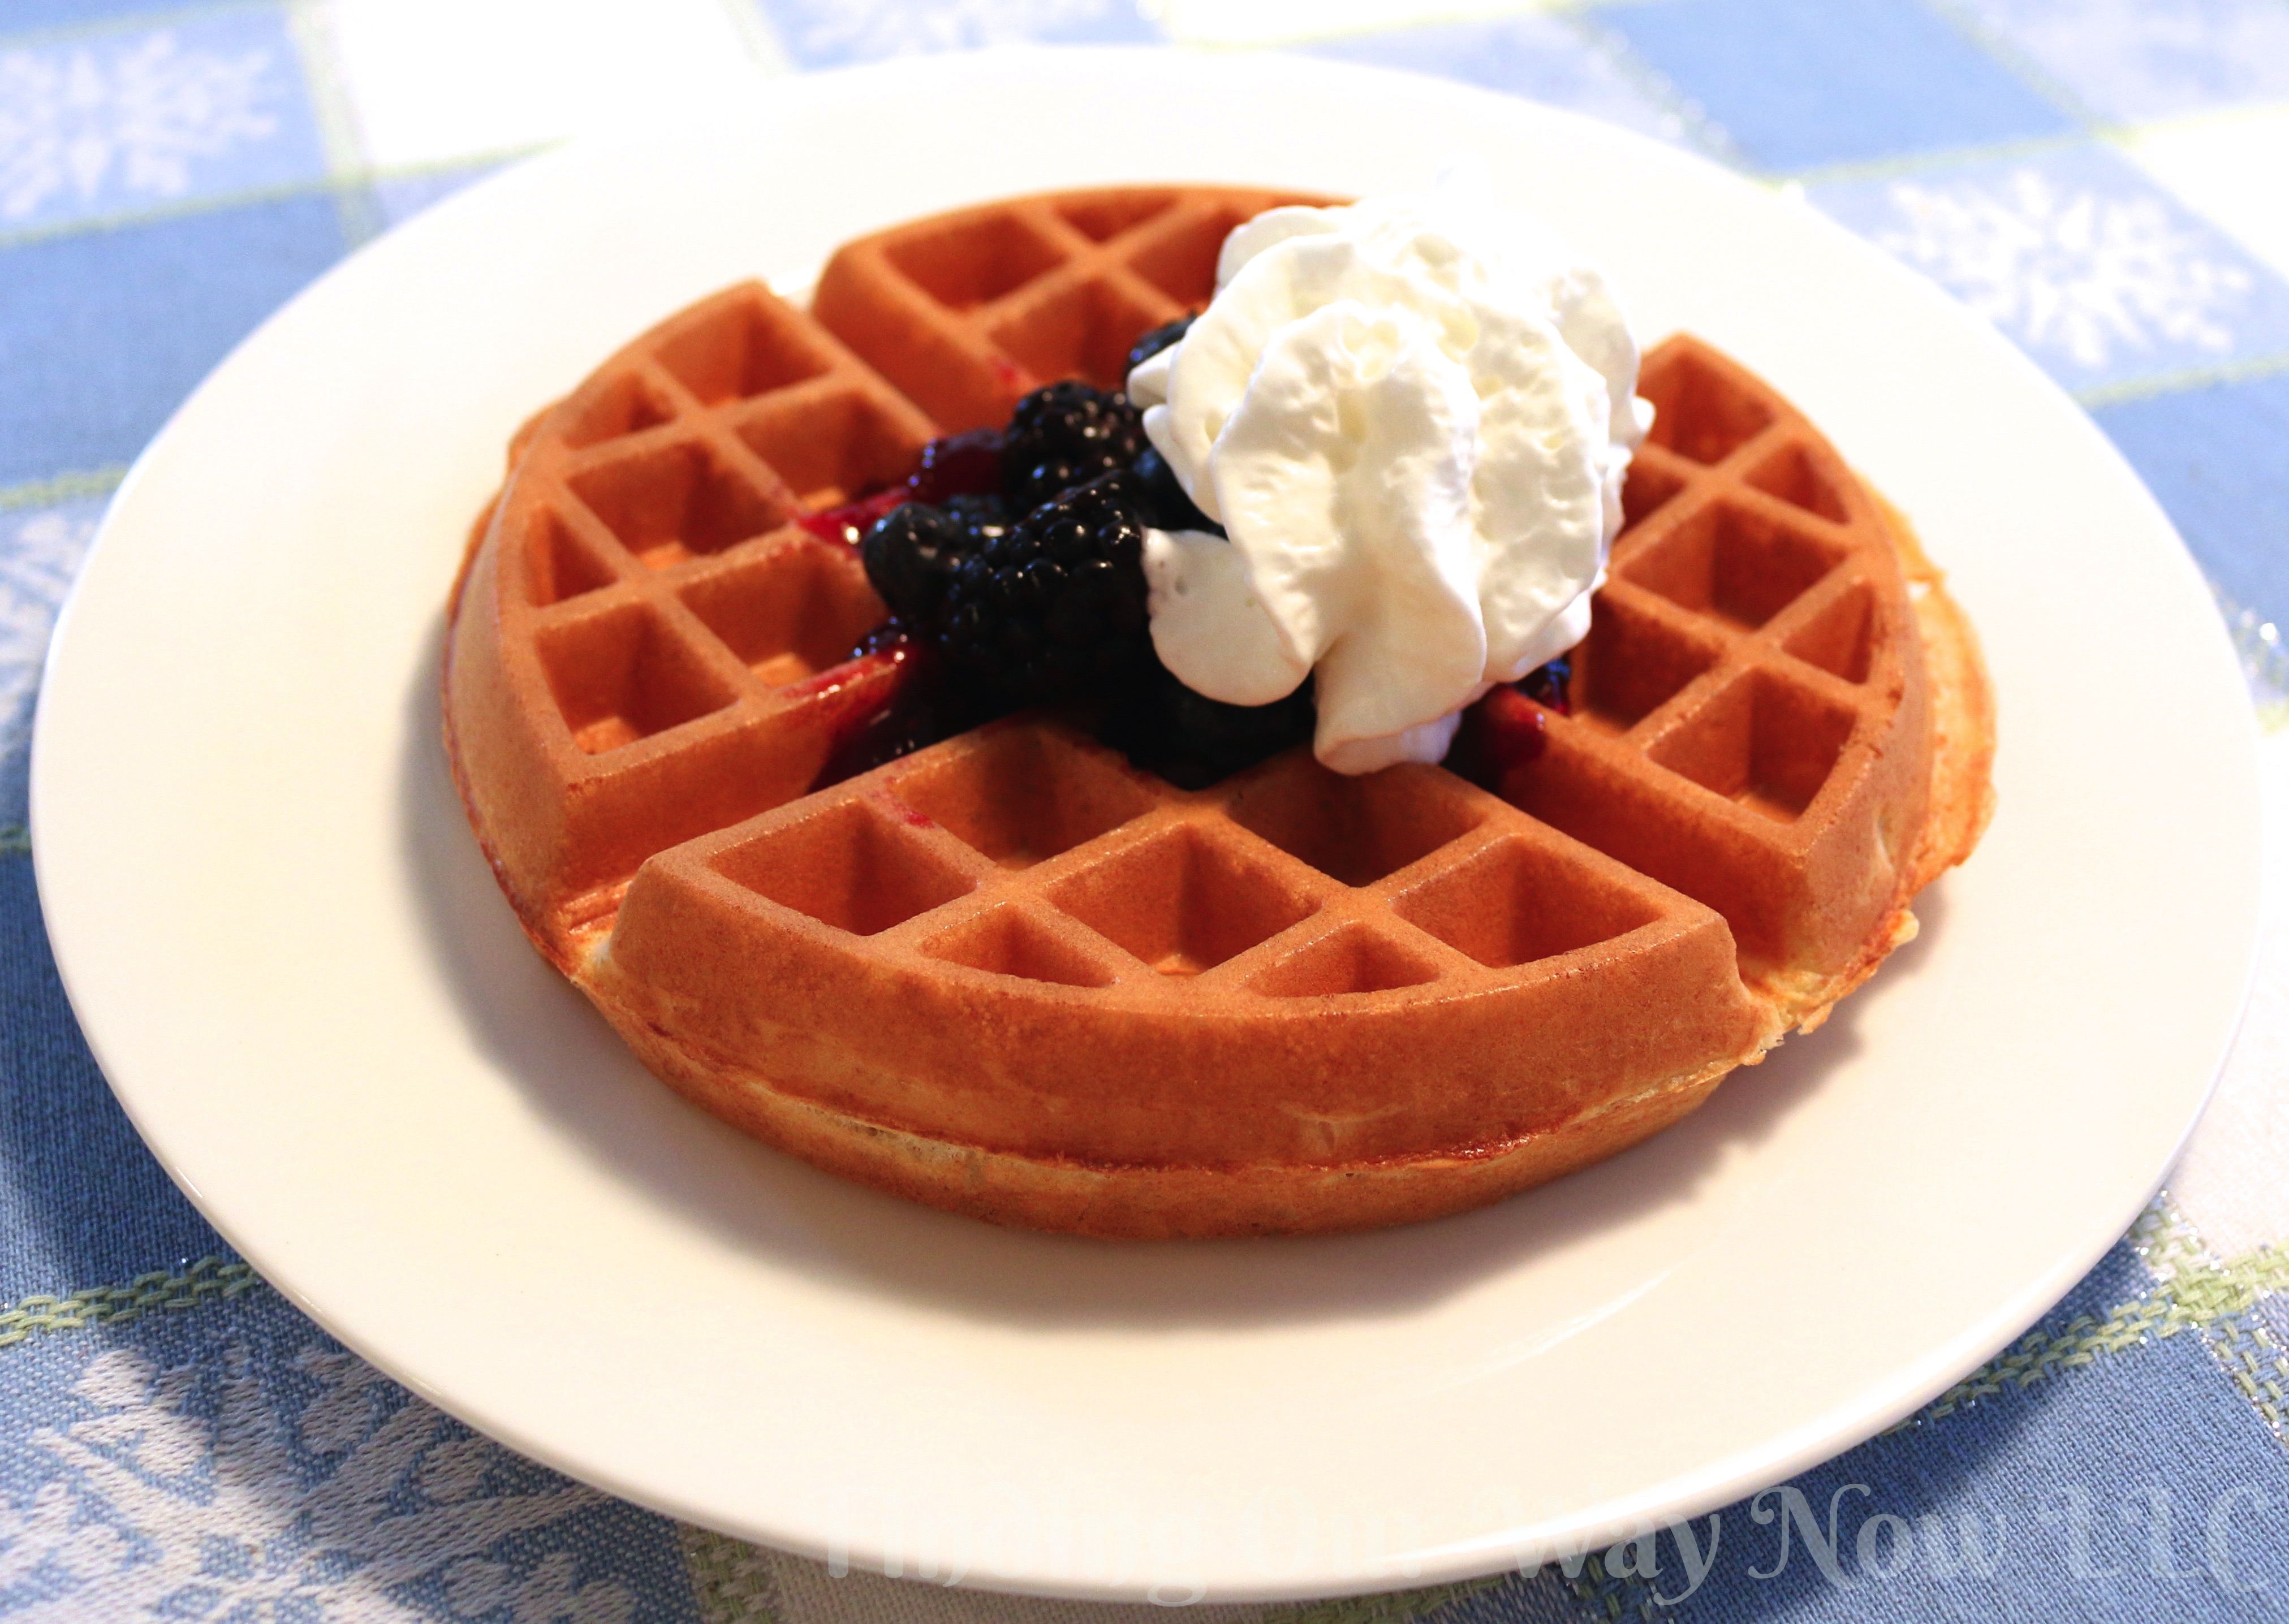 Homemade Belgian Waffles: #Recipe - Finding Our Way Now